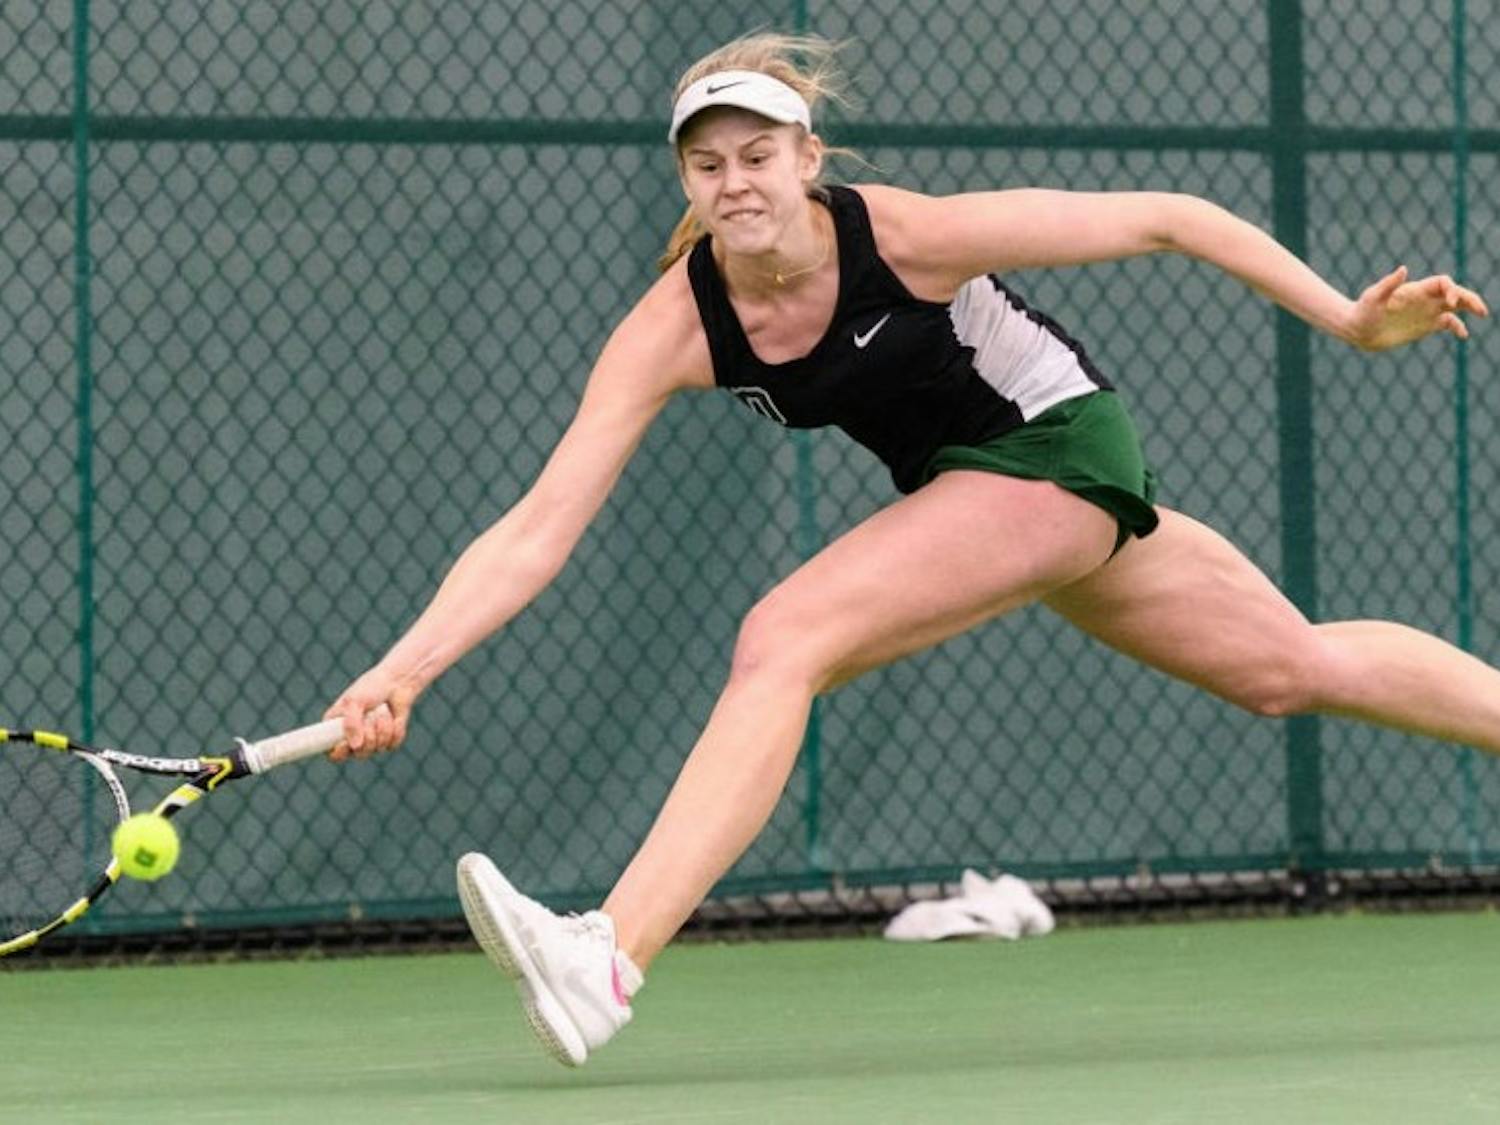 Jacqueline Crawford ’17 served as a team captain her senior year and earned second team All-Ivy honors as a singles player.